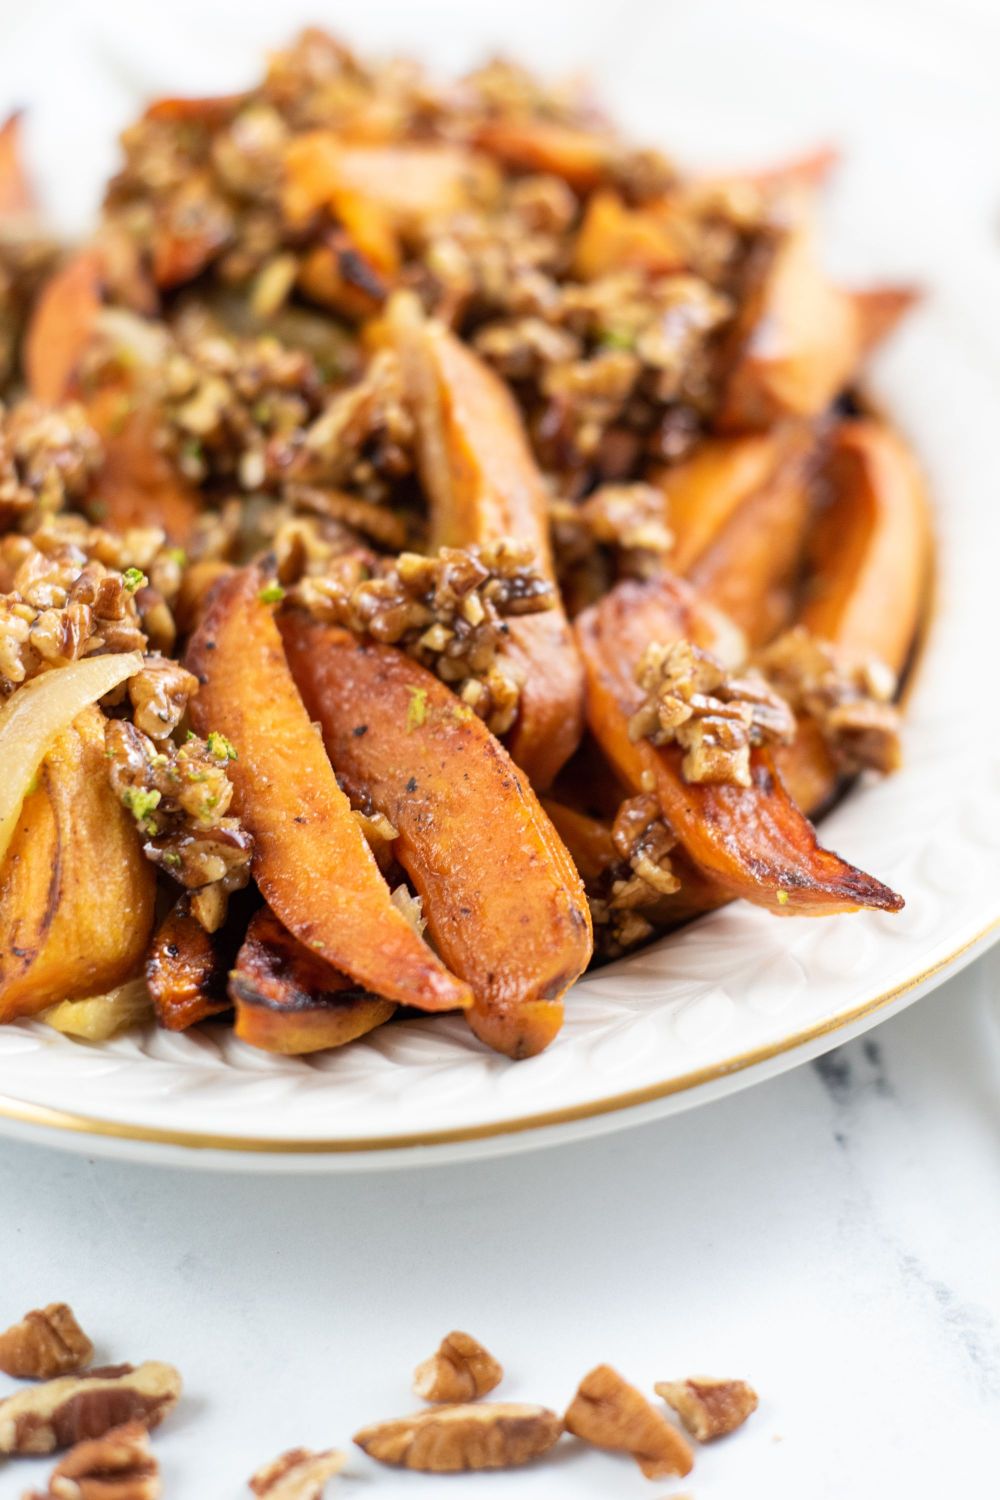 Sweet Potatoes with nuts scattered around.